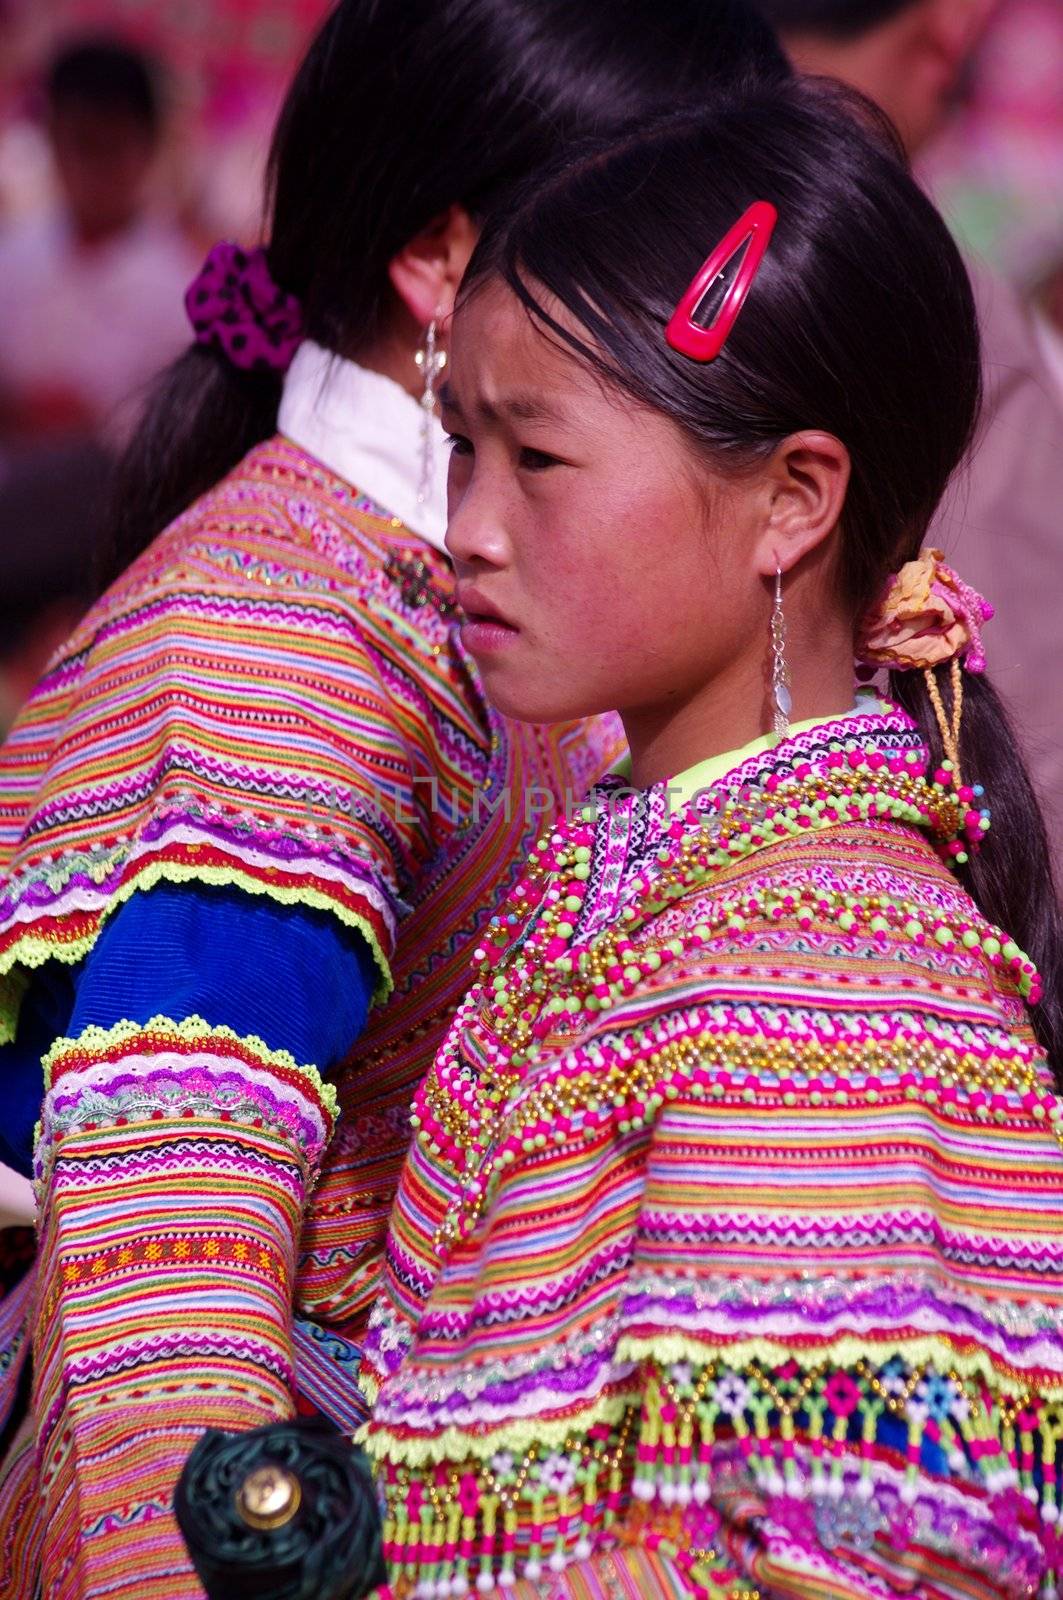 Flowered Hmong girl by Duroc